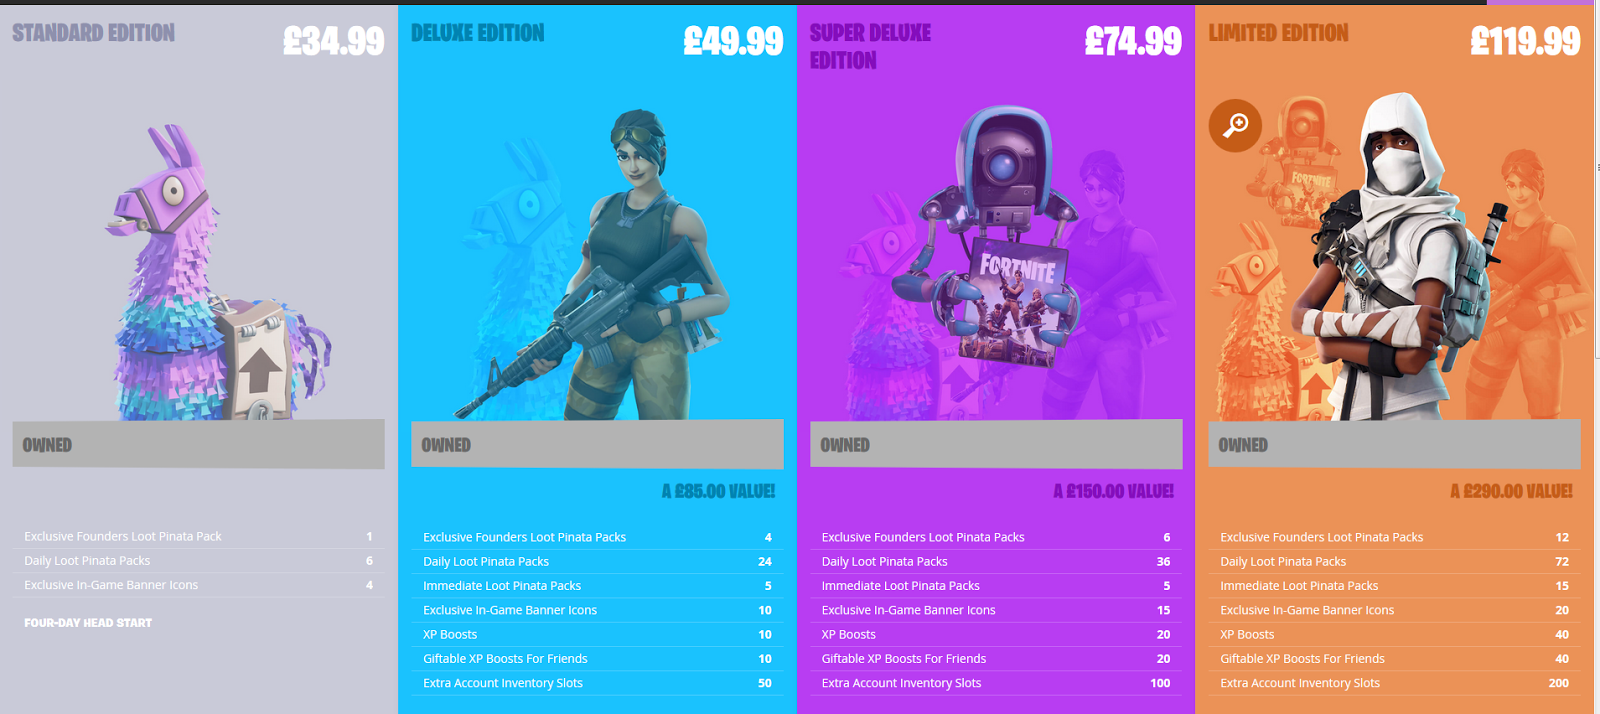 Fortnite Deluxe Edition Banners - 1600 x 714 png 593kB